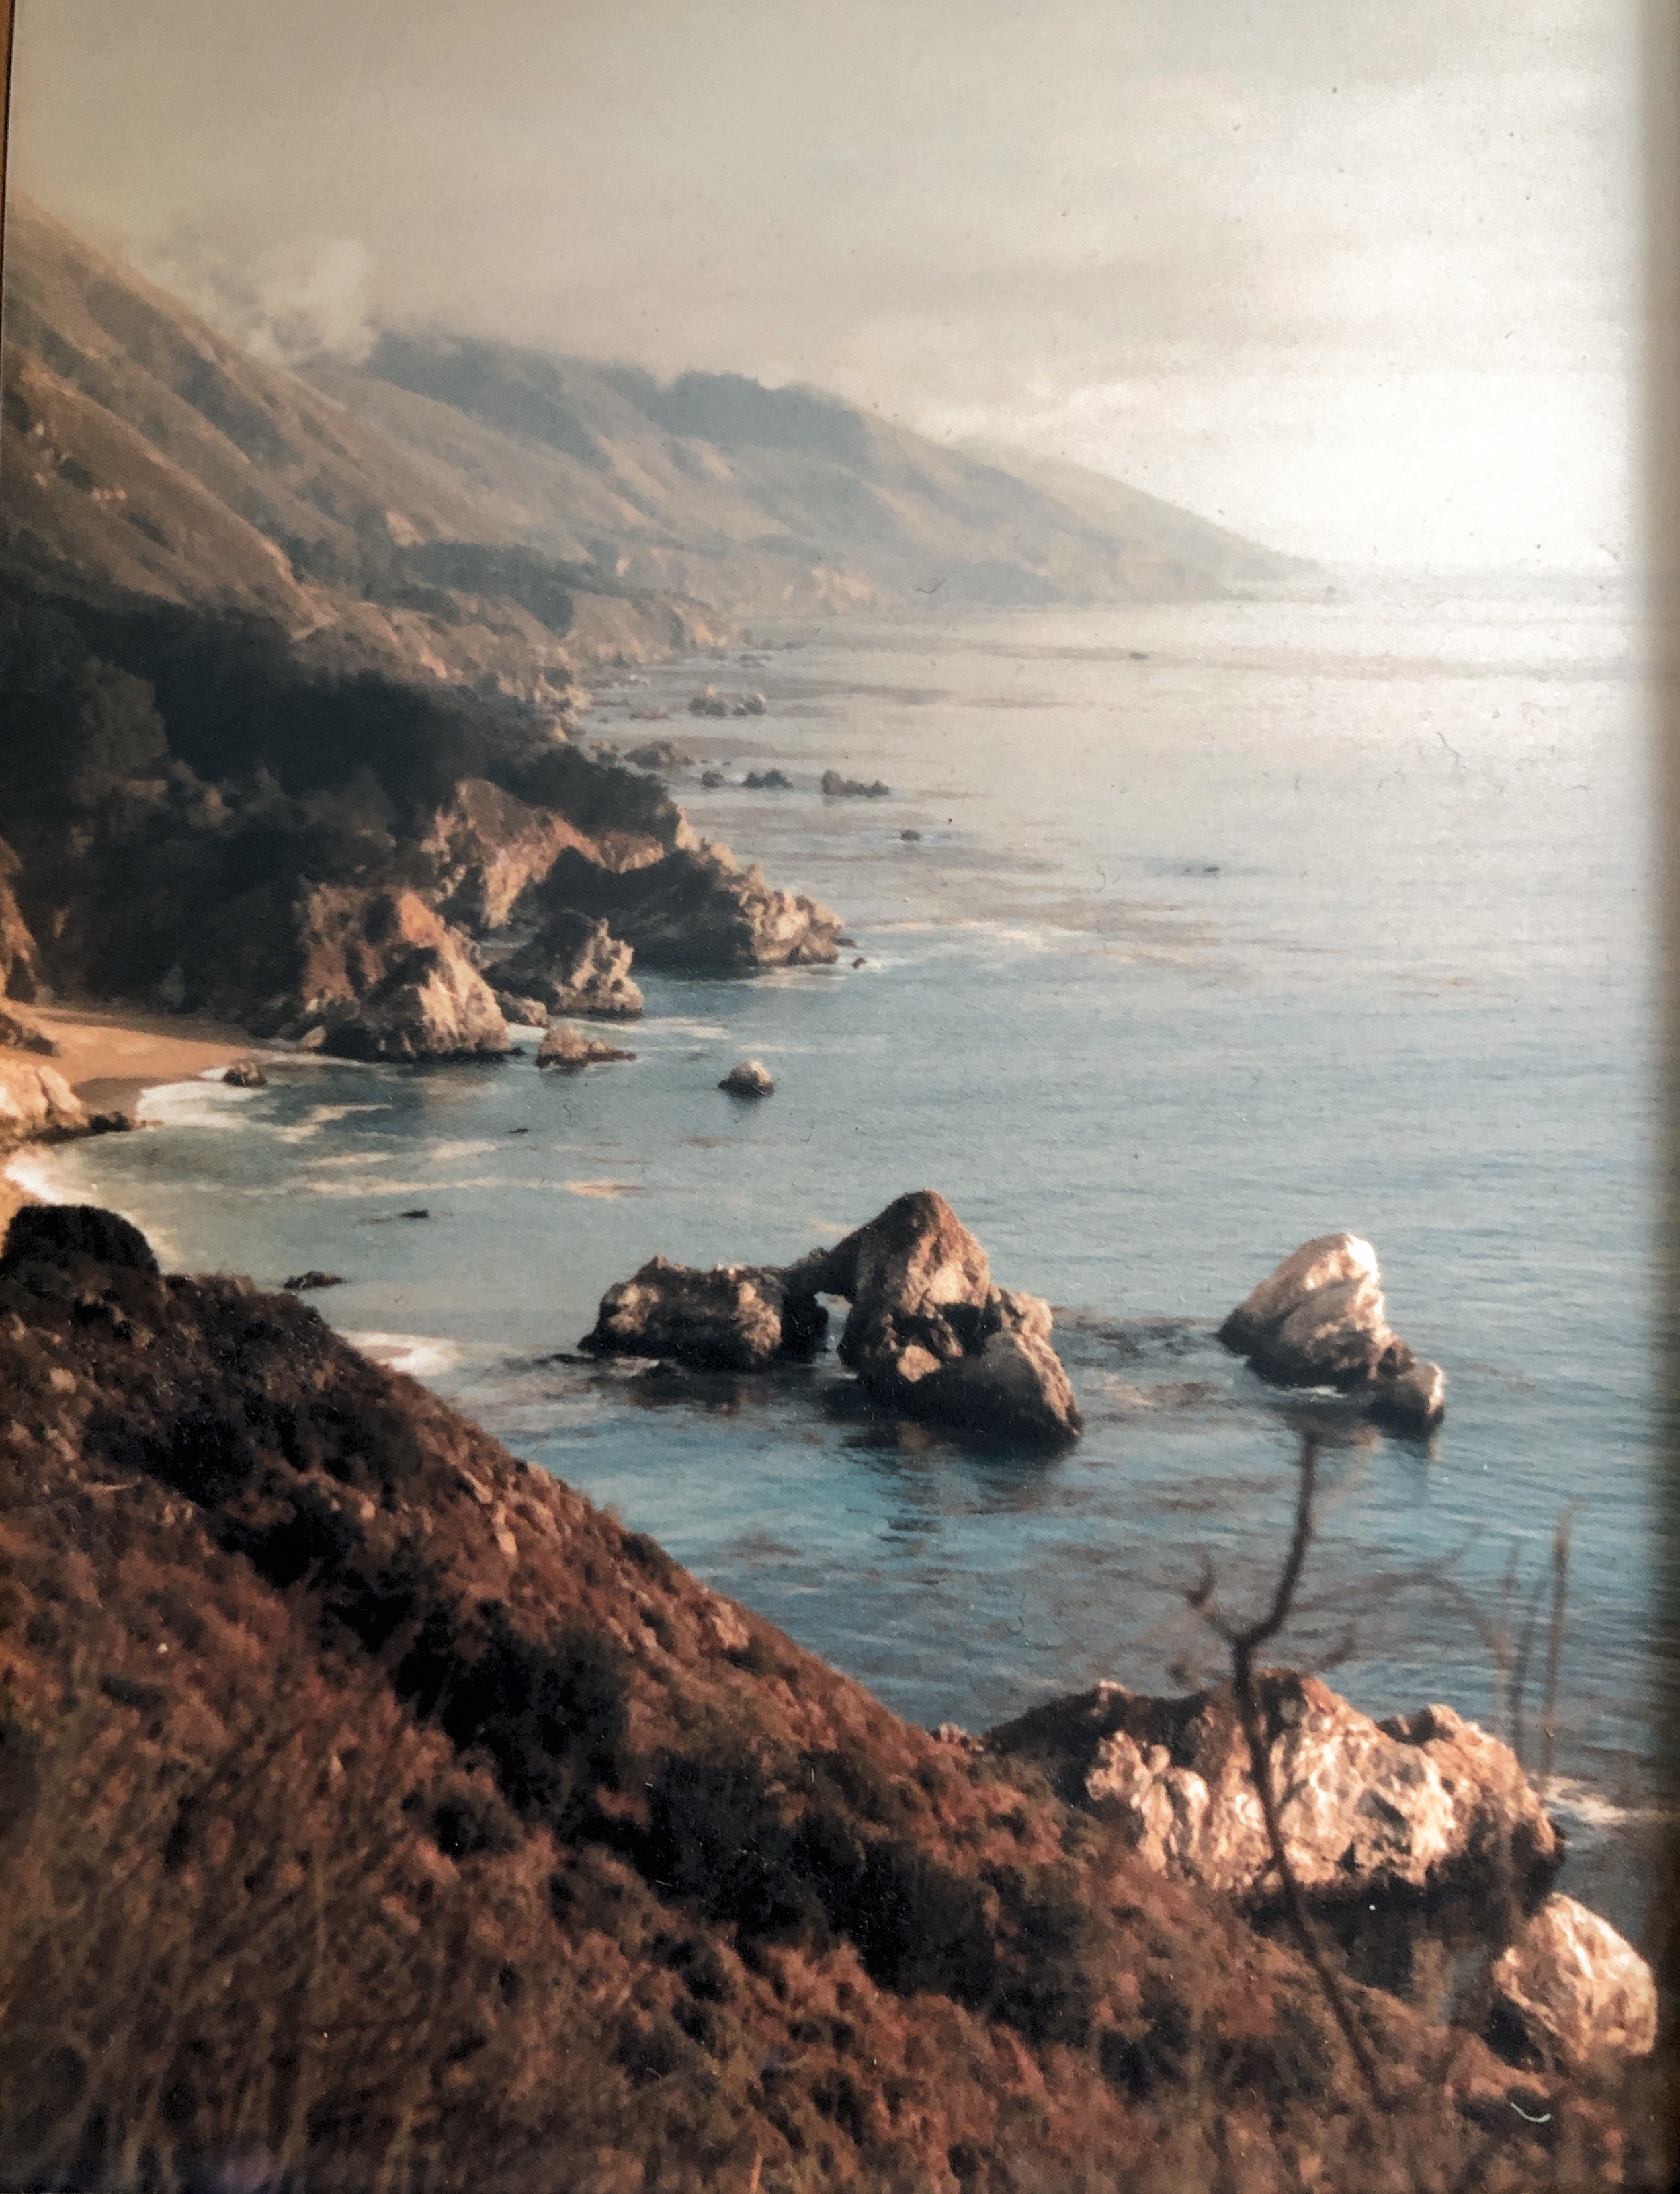 Pacific Coast off Highway one close to Big Sur. 1994.